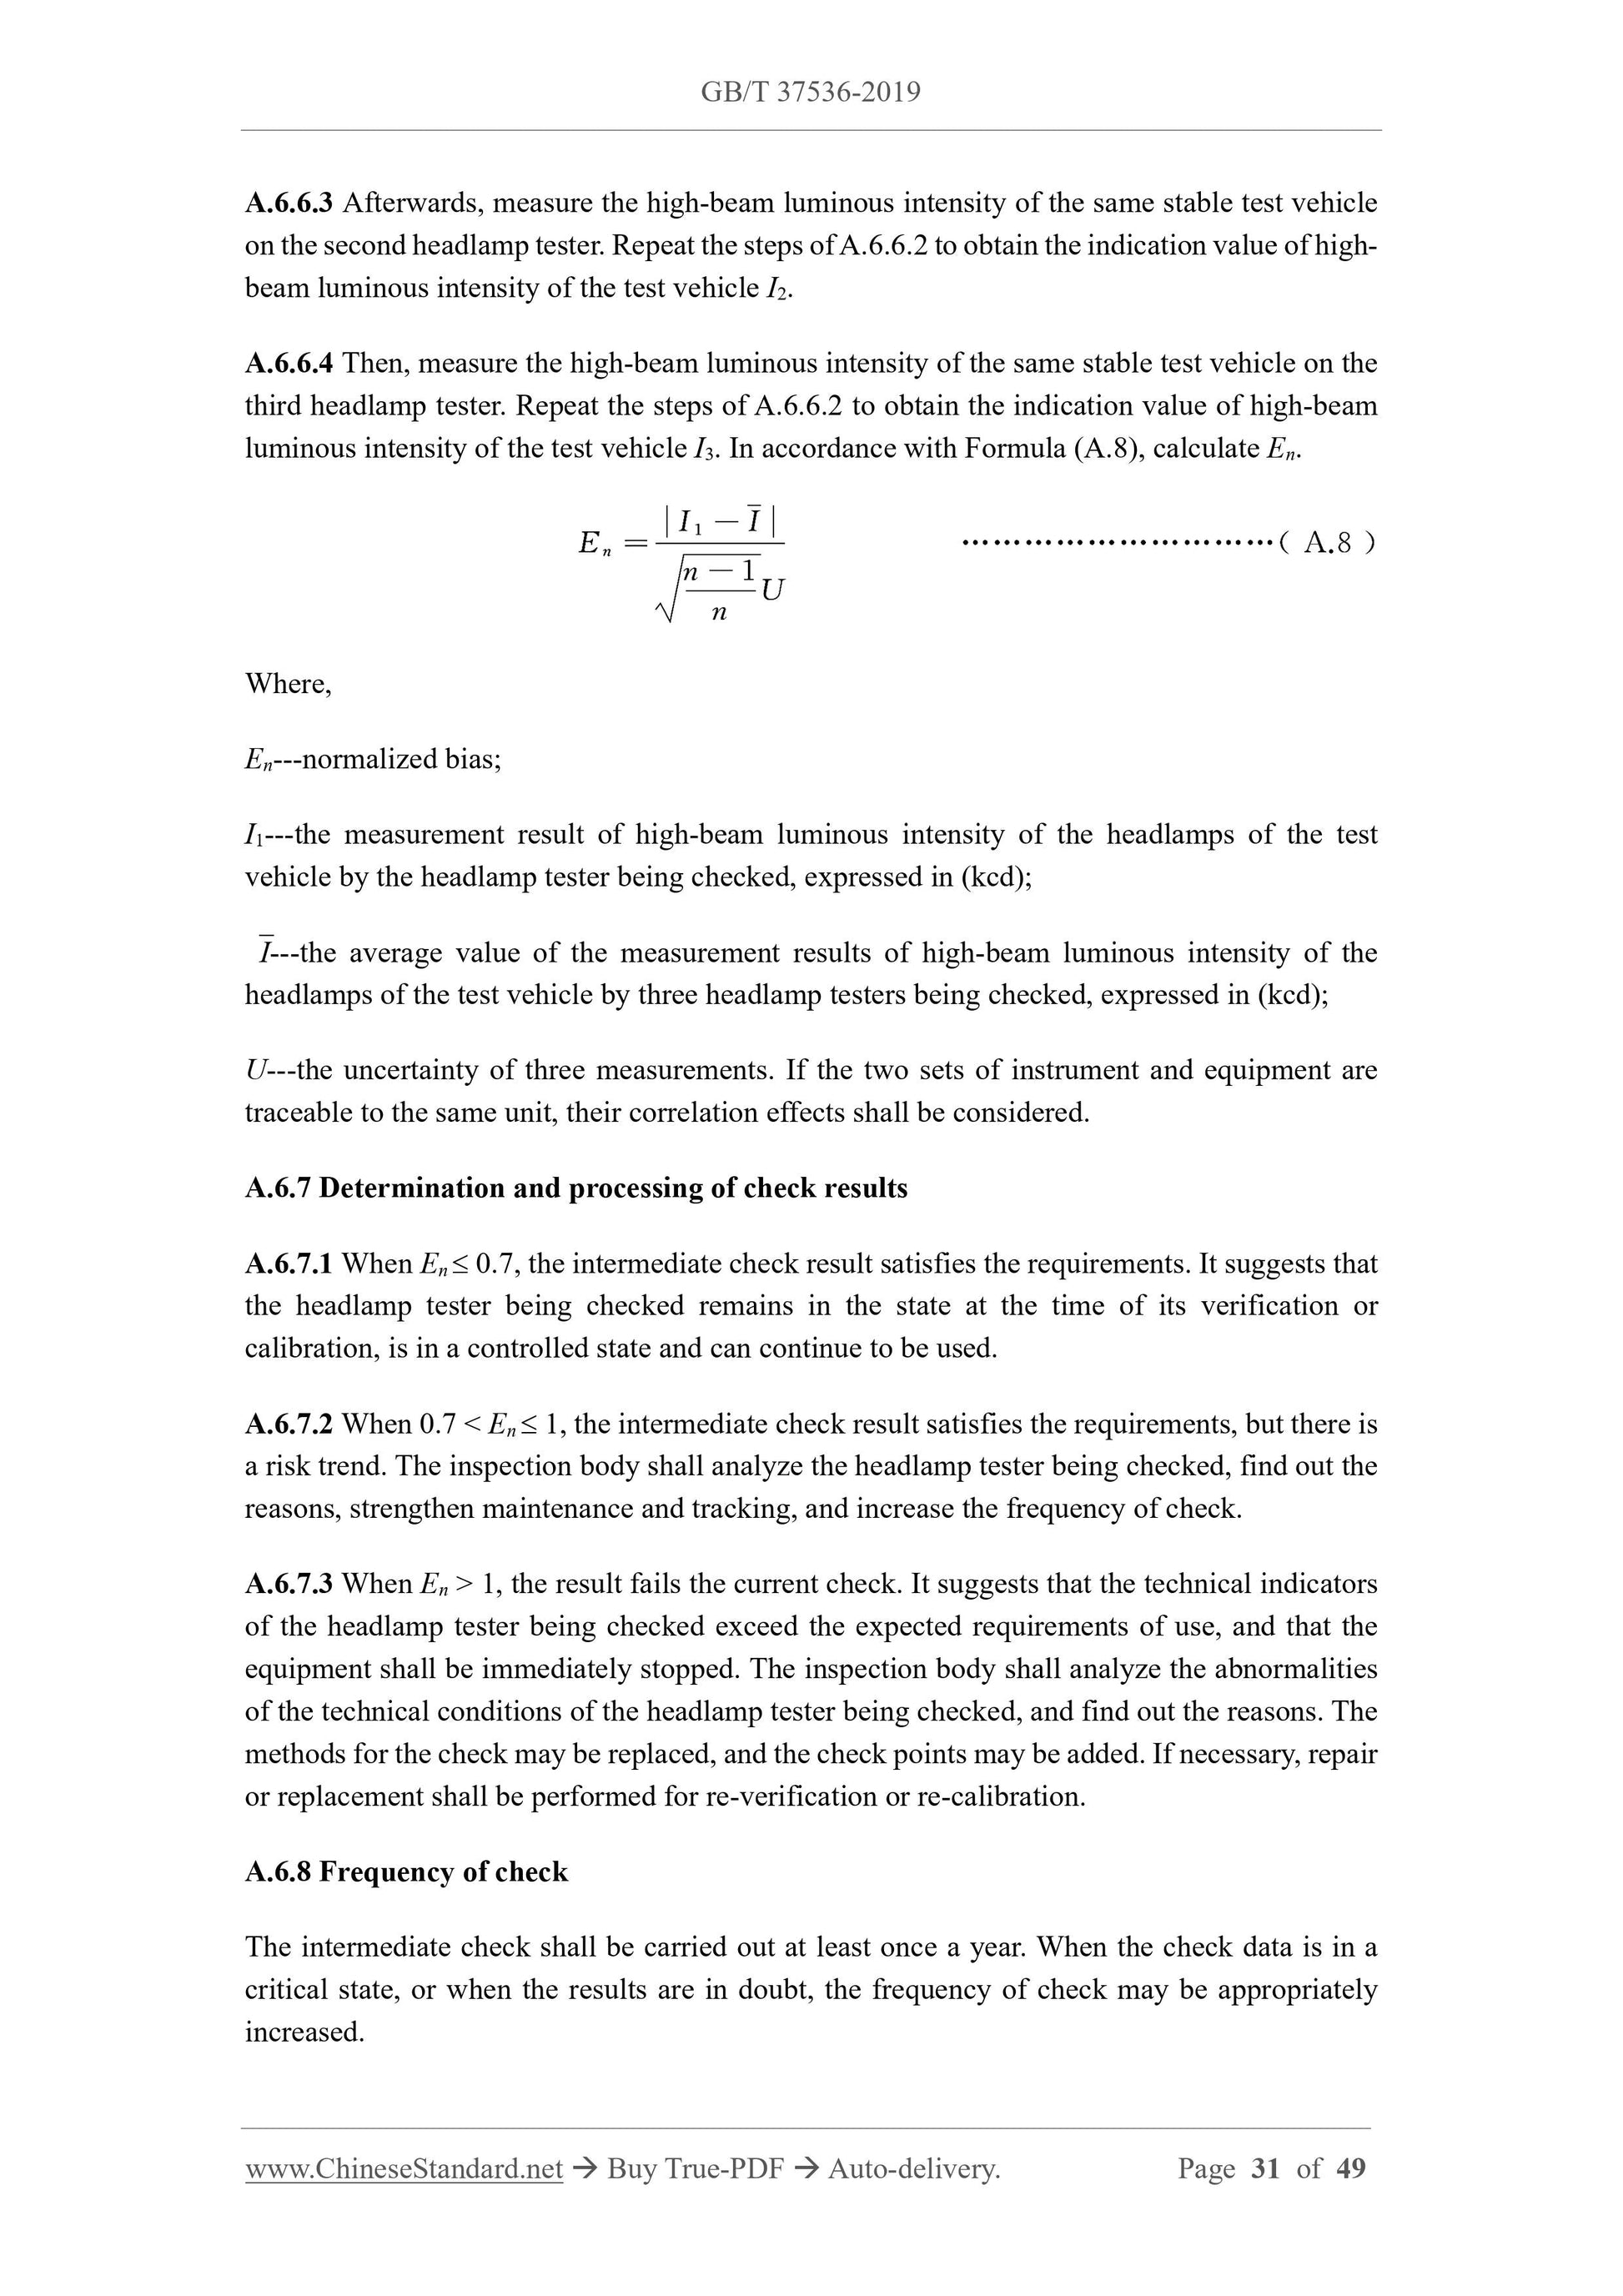 GB/T 37536-2019 Page 11